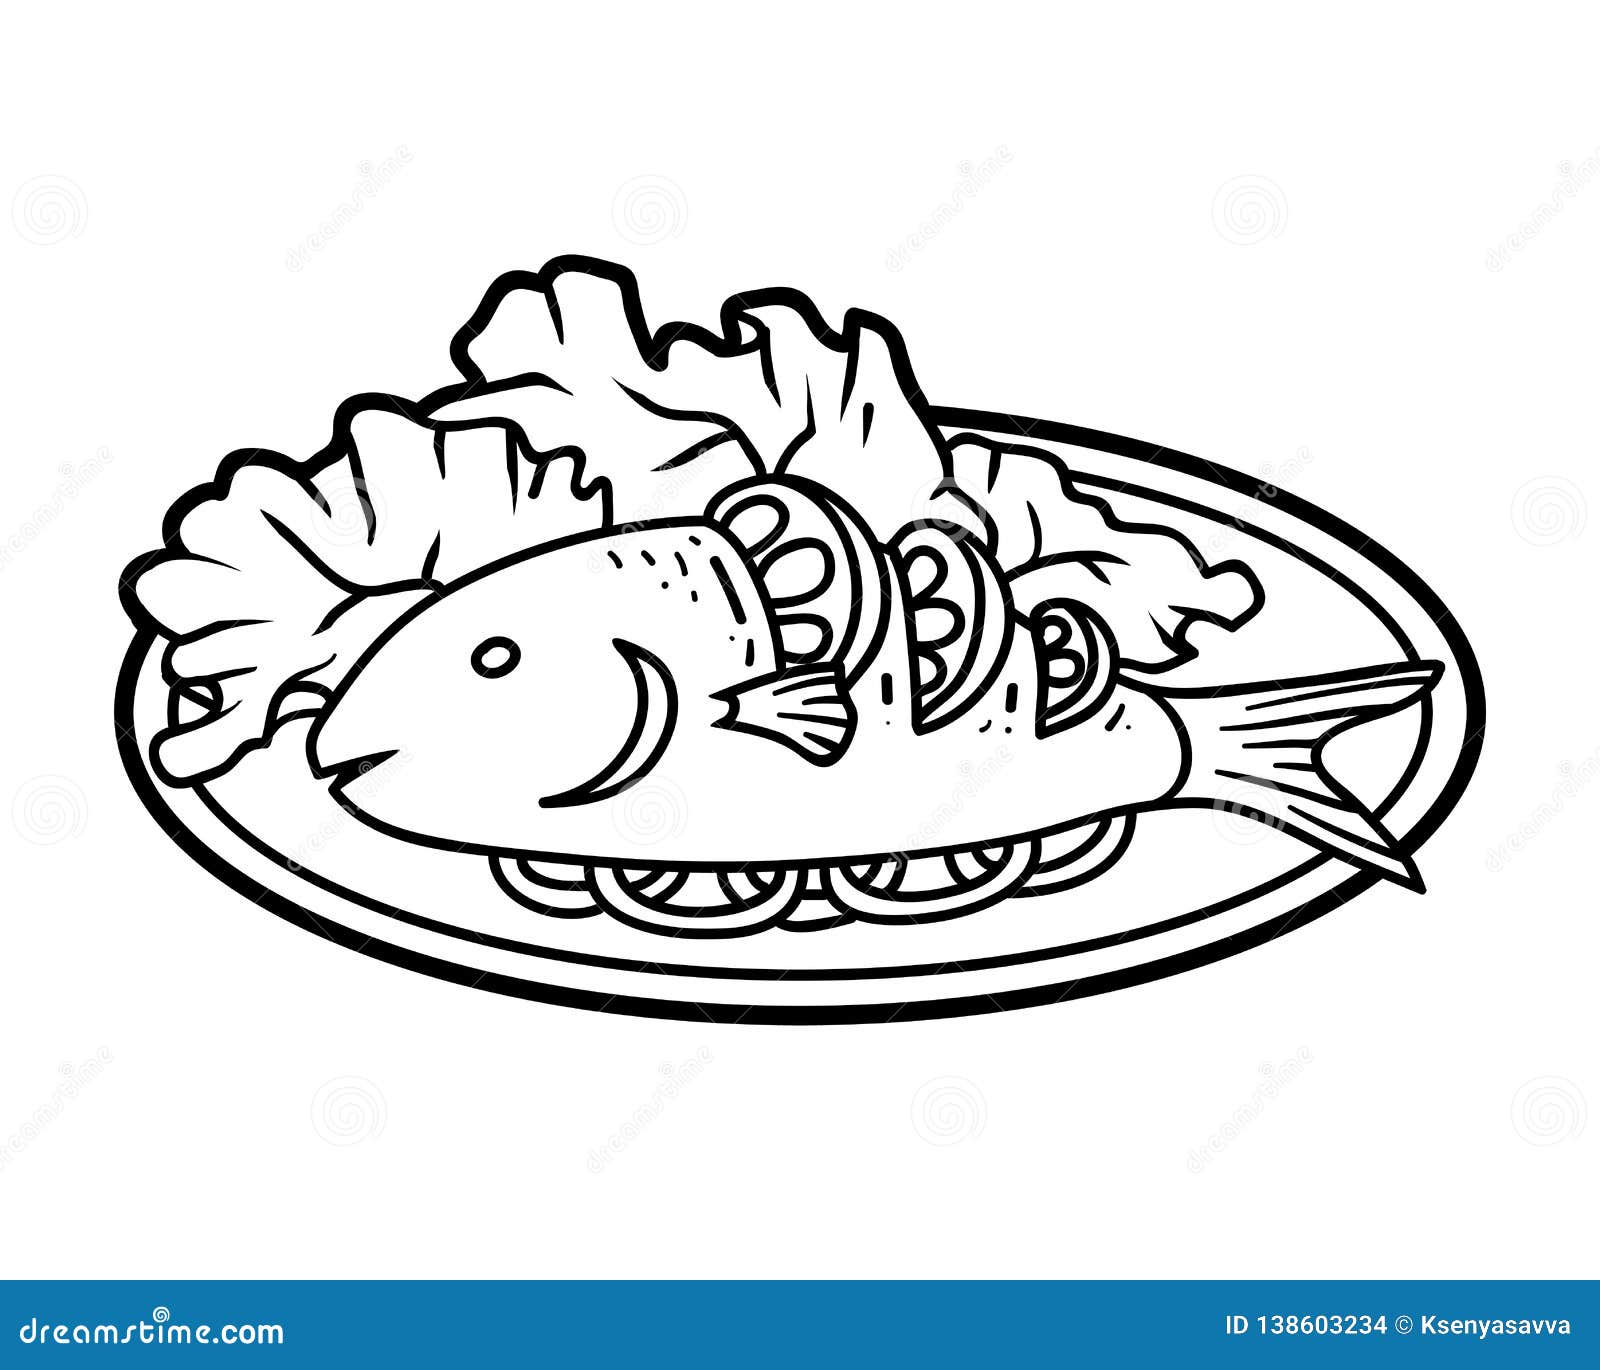 Coloring Book, Grilled Fish On Plate Stock Vector